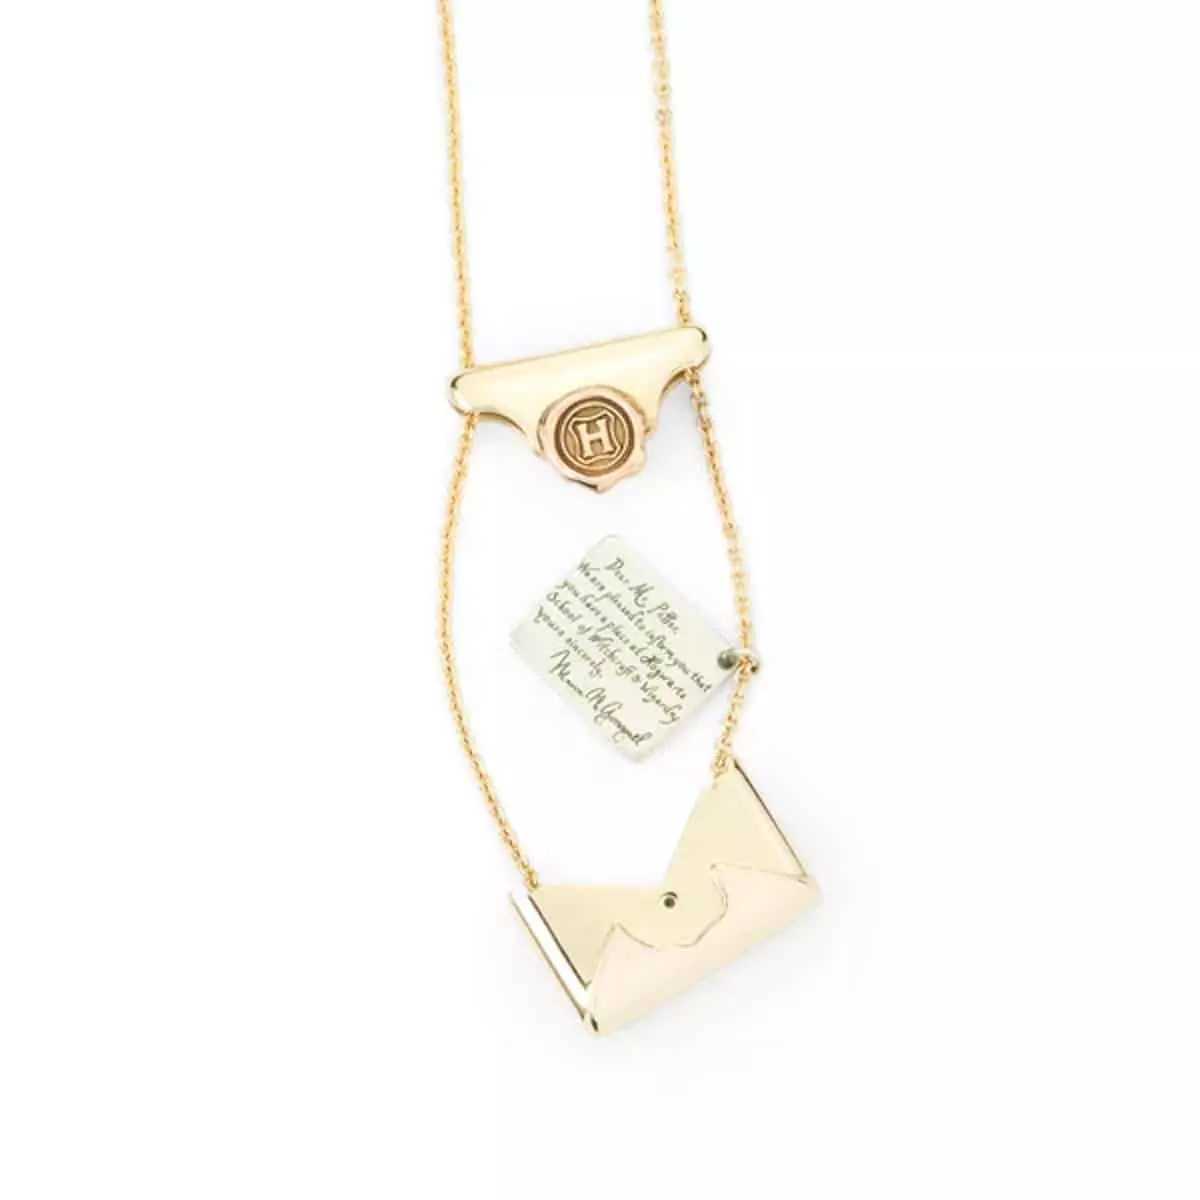 The Hogwart’s Acceptance Letter Necklace from the collection. 